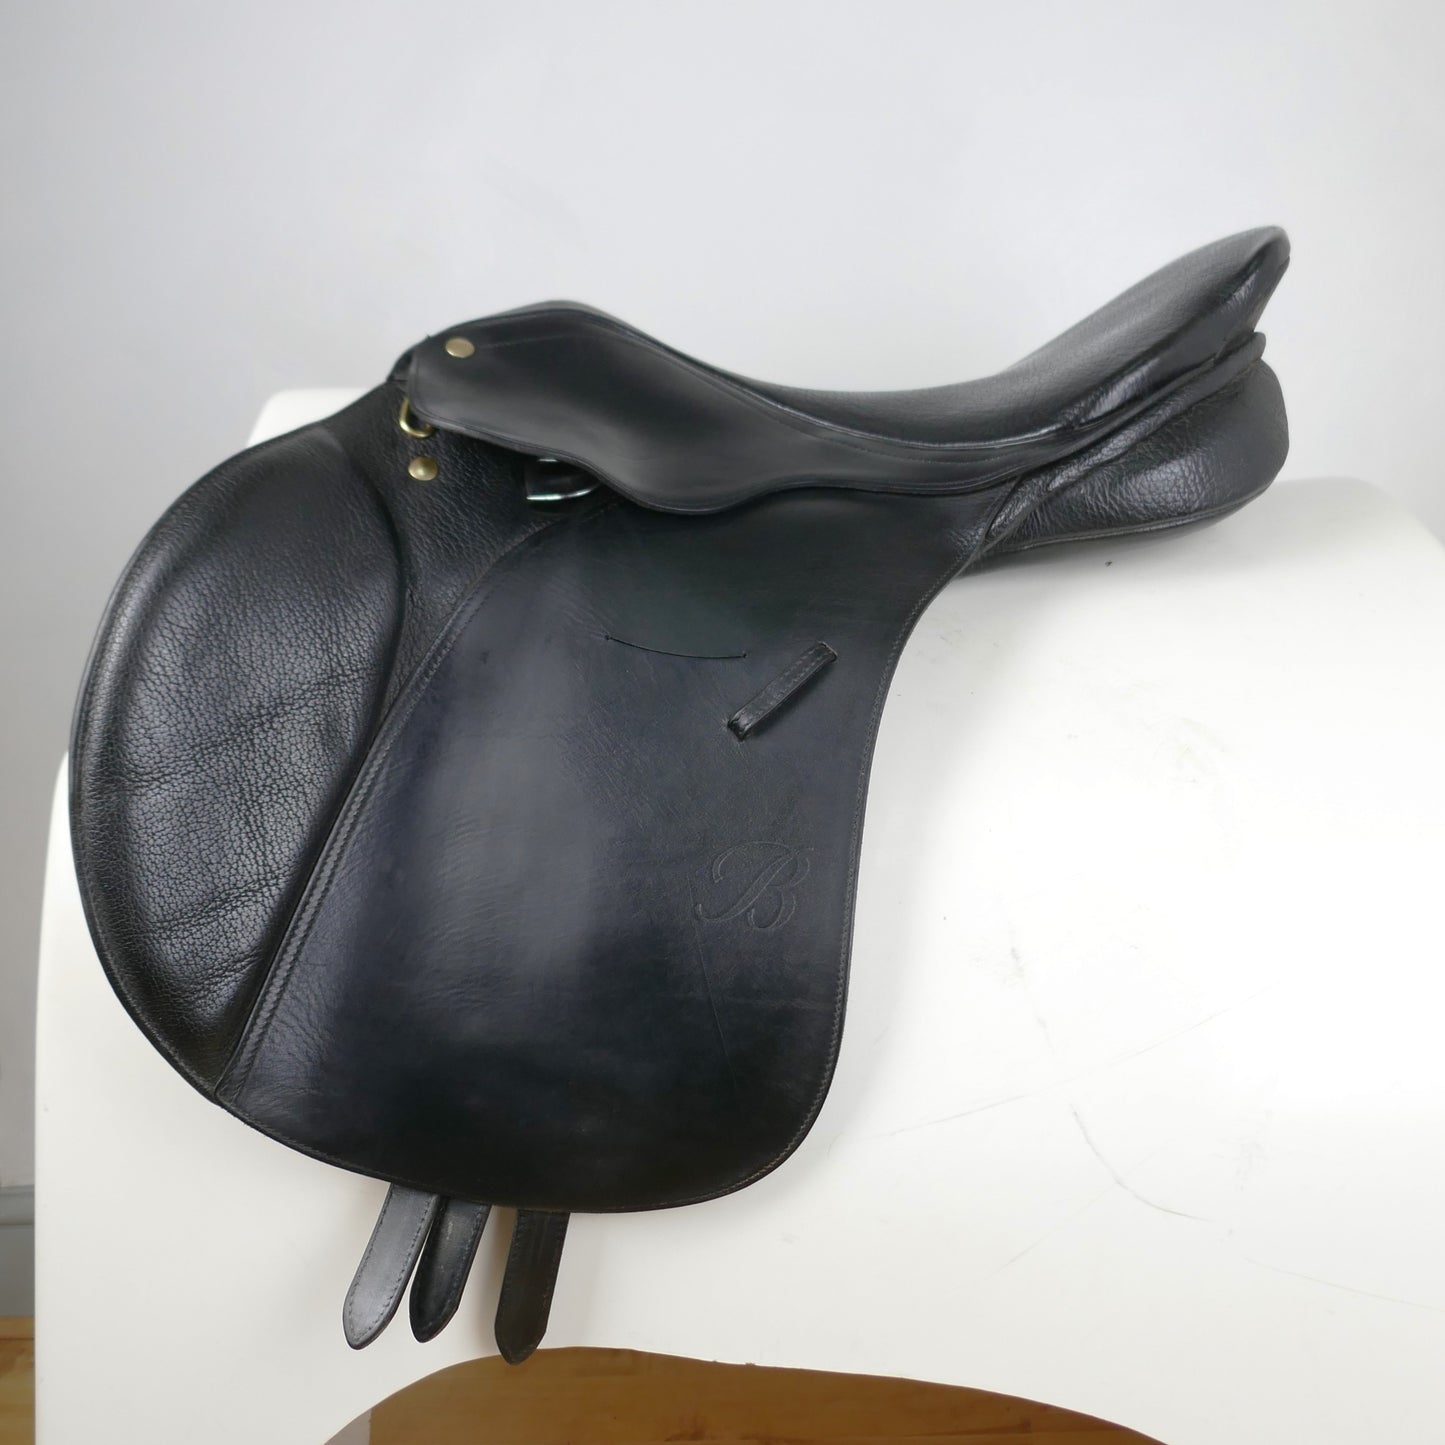 **SOLD** Bates Caprilli Eventing Jump Saddle, 17.5 Seat, Adjustable Tree -  Exchangeable Gullet, CAIR Panels